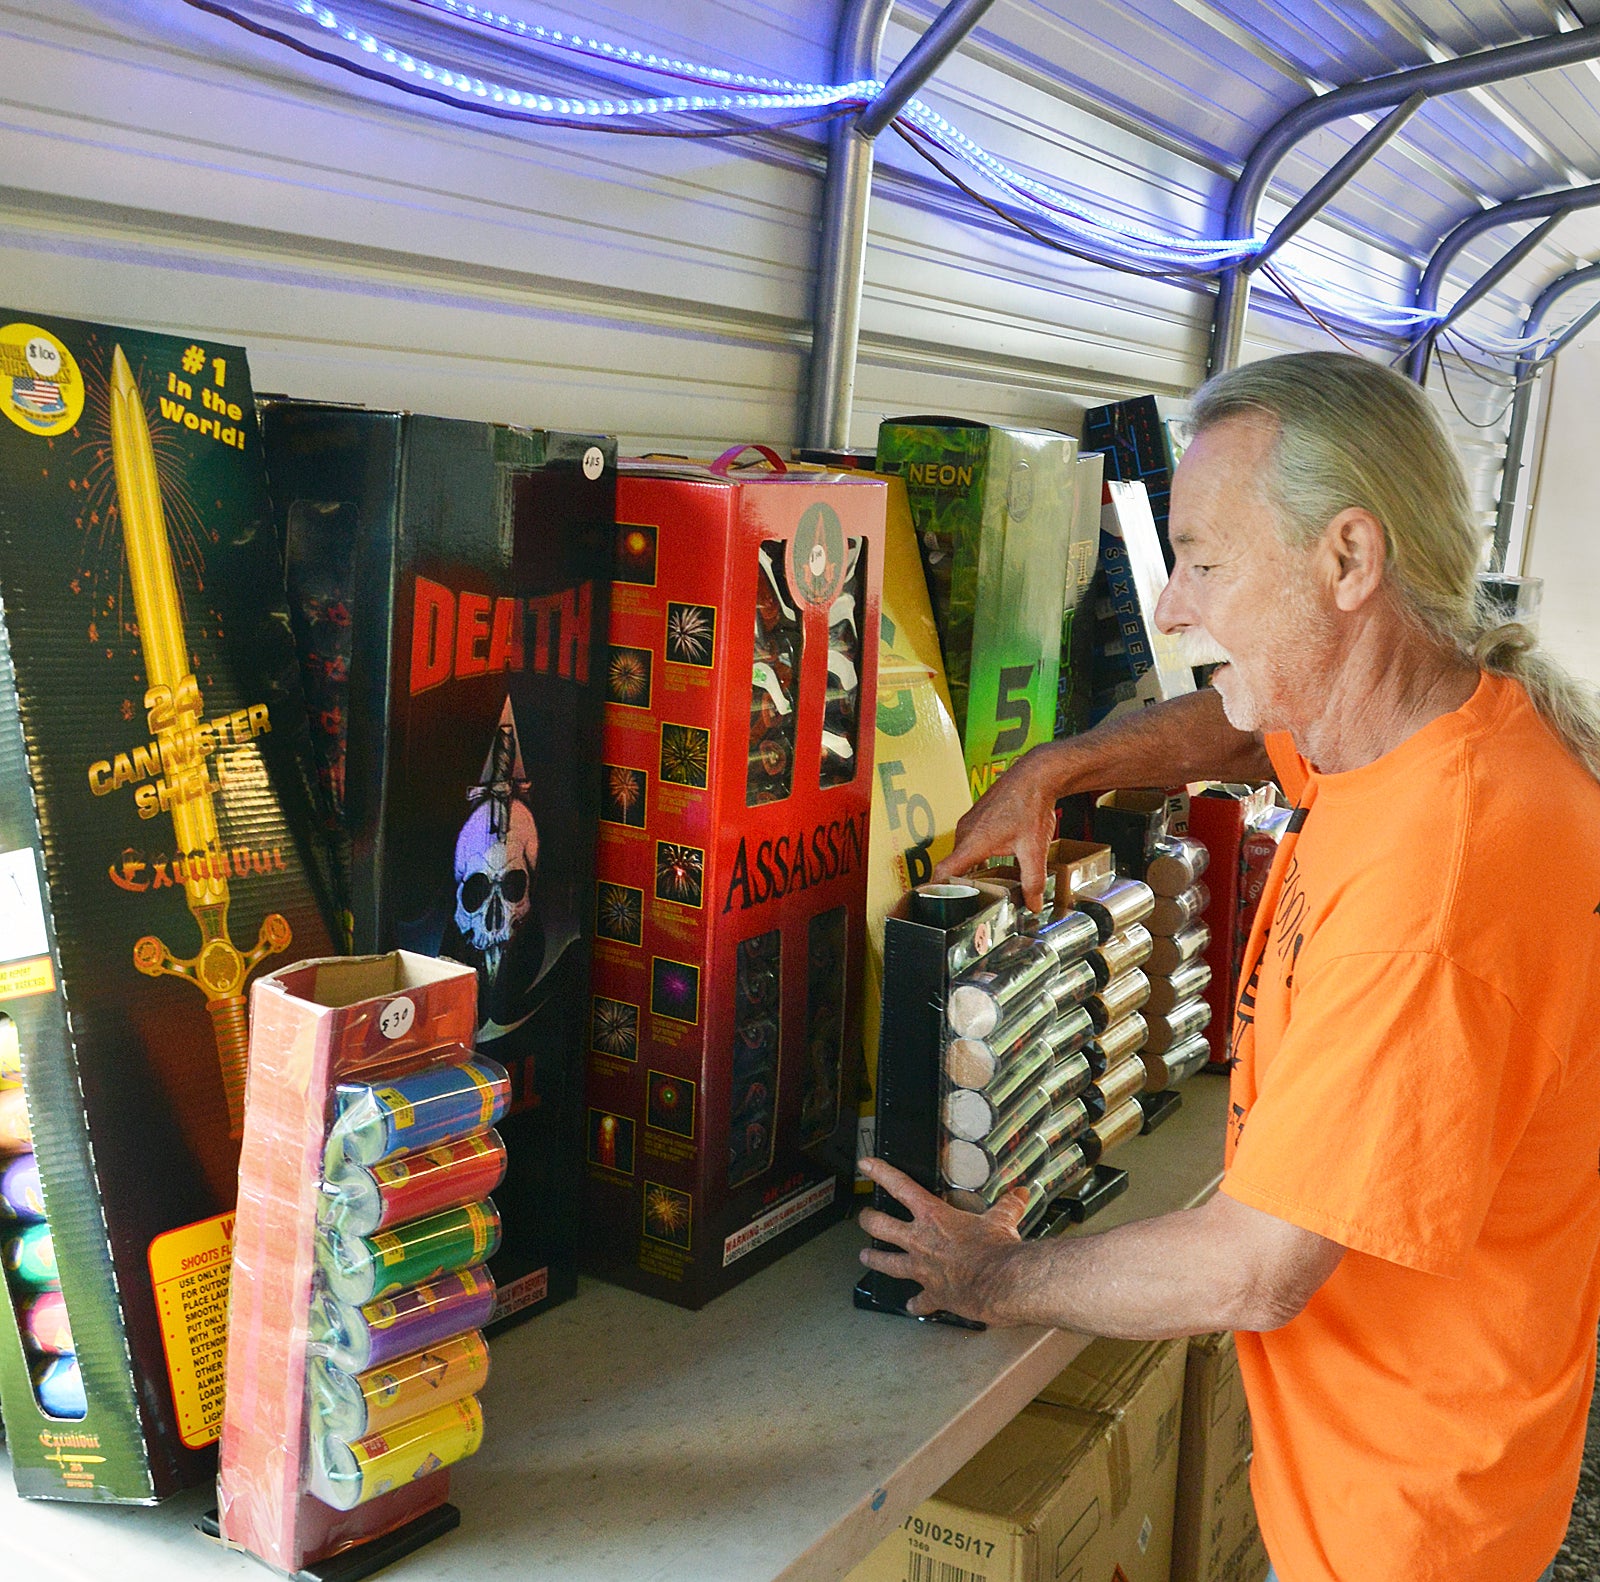 Ray Boone, owner of Fourth Street Fireworks and Little Sign Shoppe, keeps a supply of large artillary shells in his fireworks booth. He said safety protocol is very important when enjoying backyard fireworks. (Photo by Robin Hart)